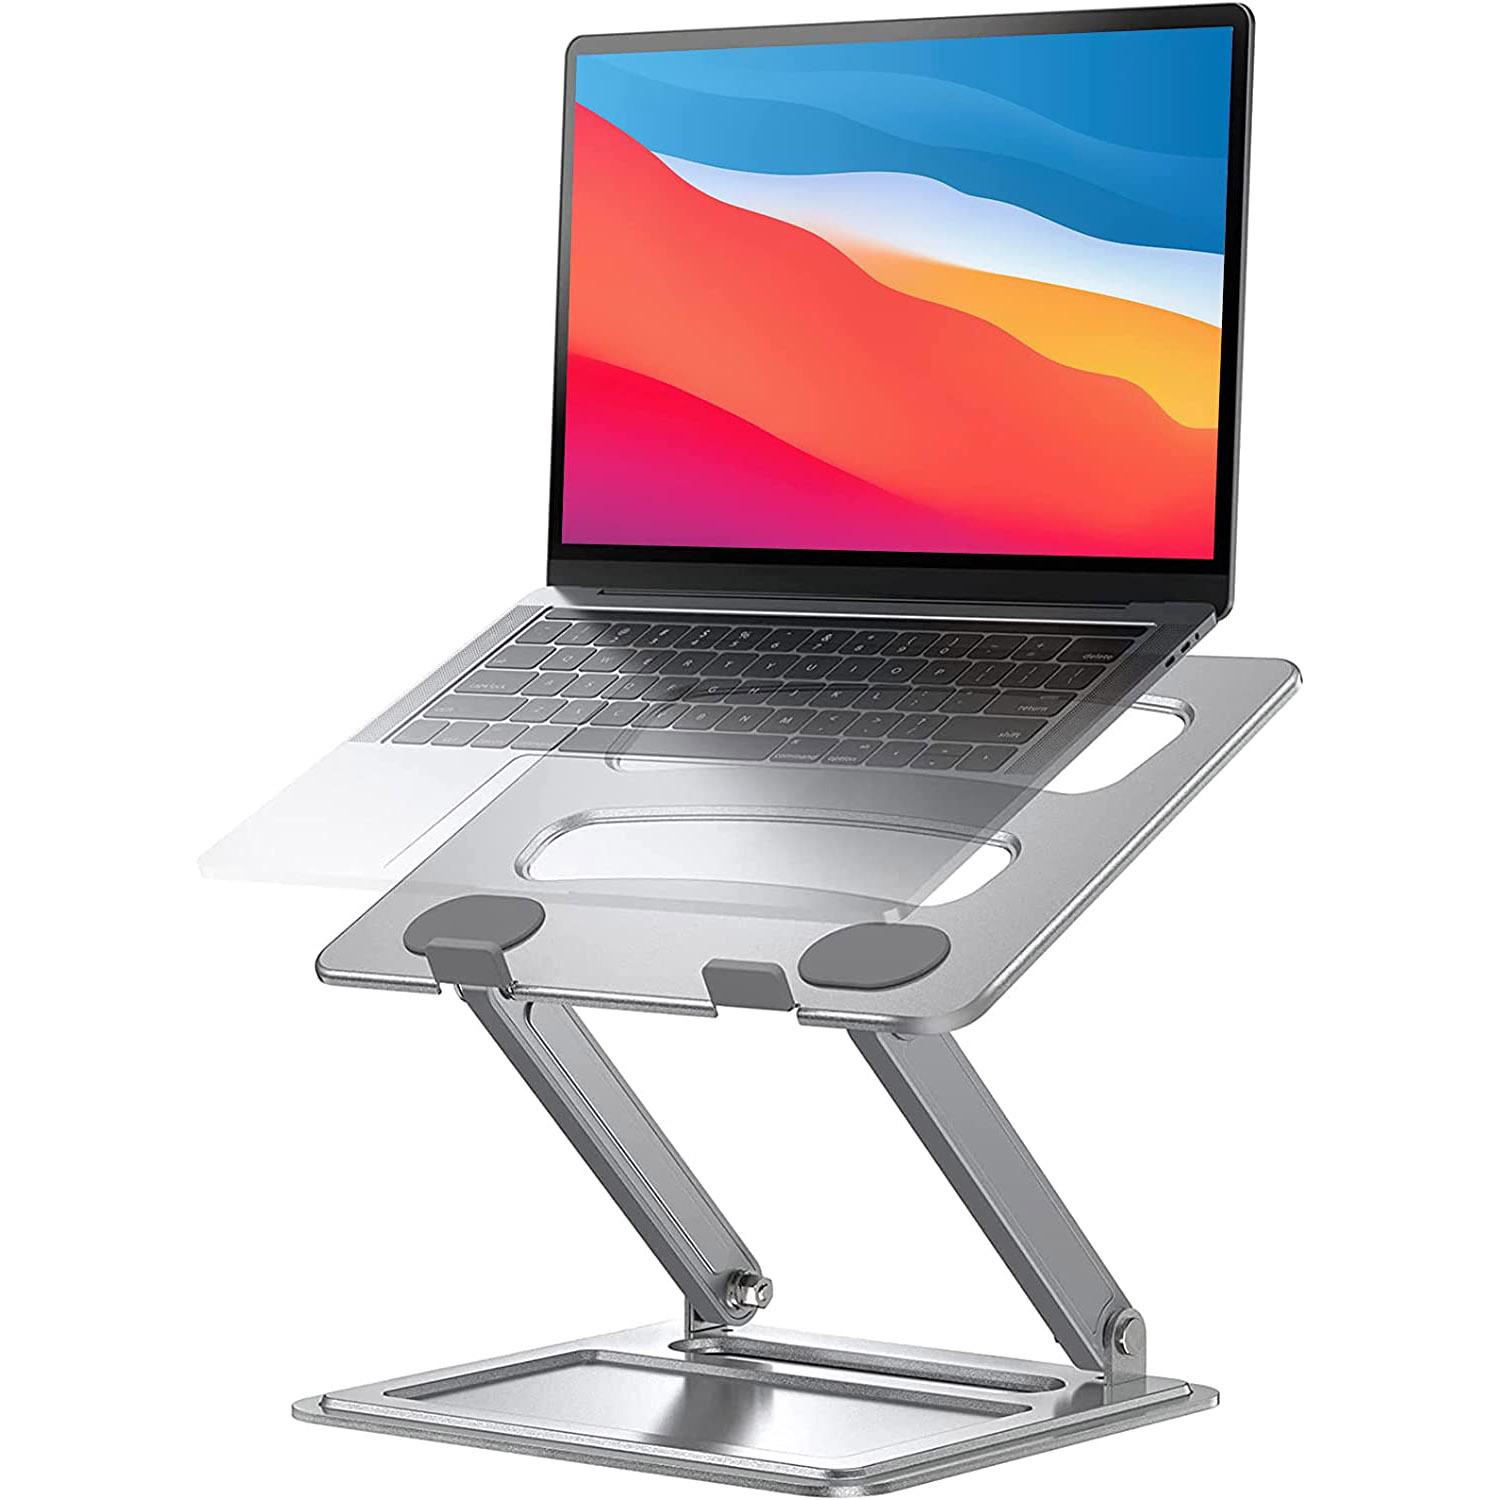 Adjustable Laptop Stand for $10.99 Shipped